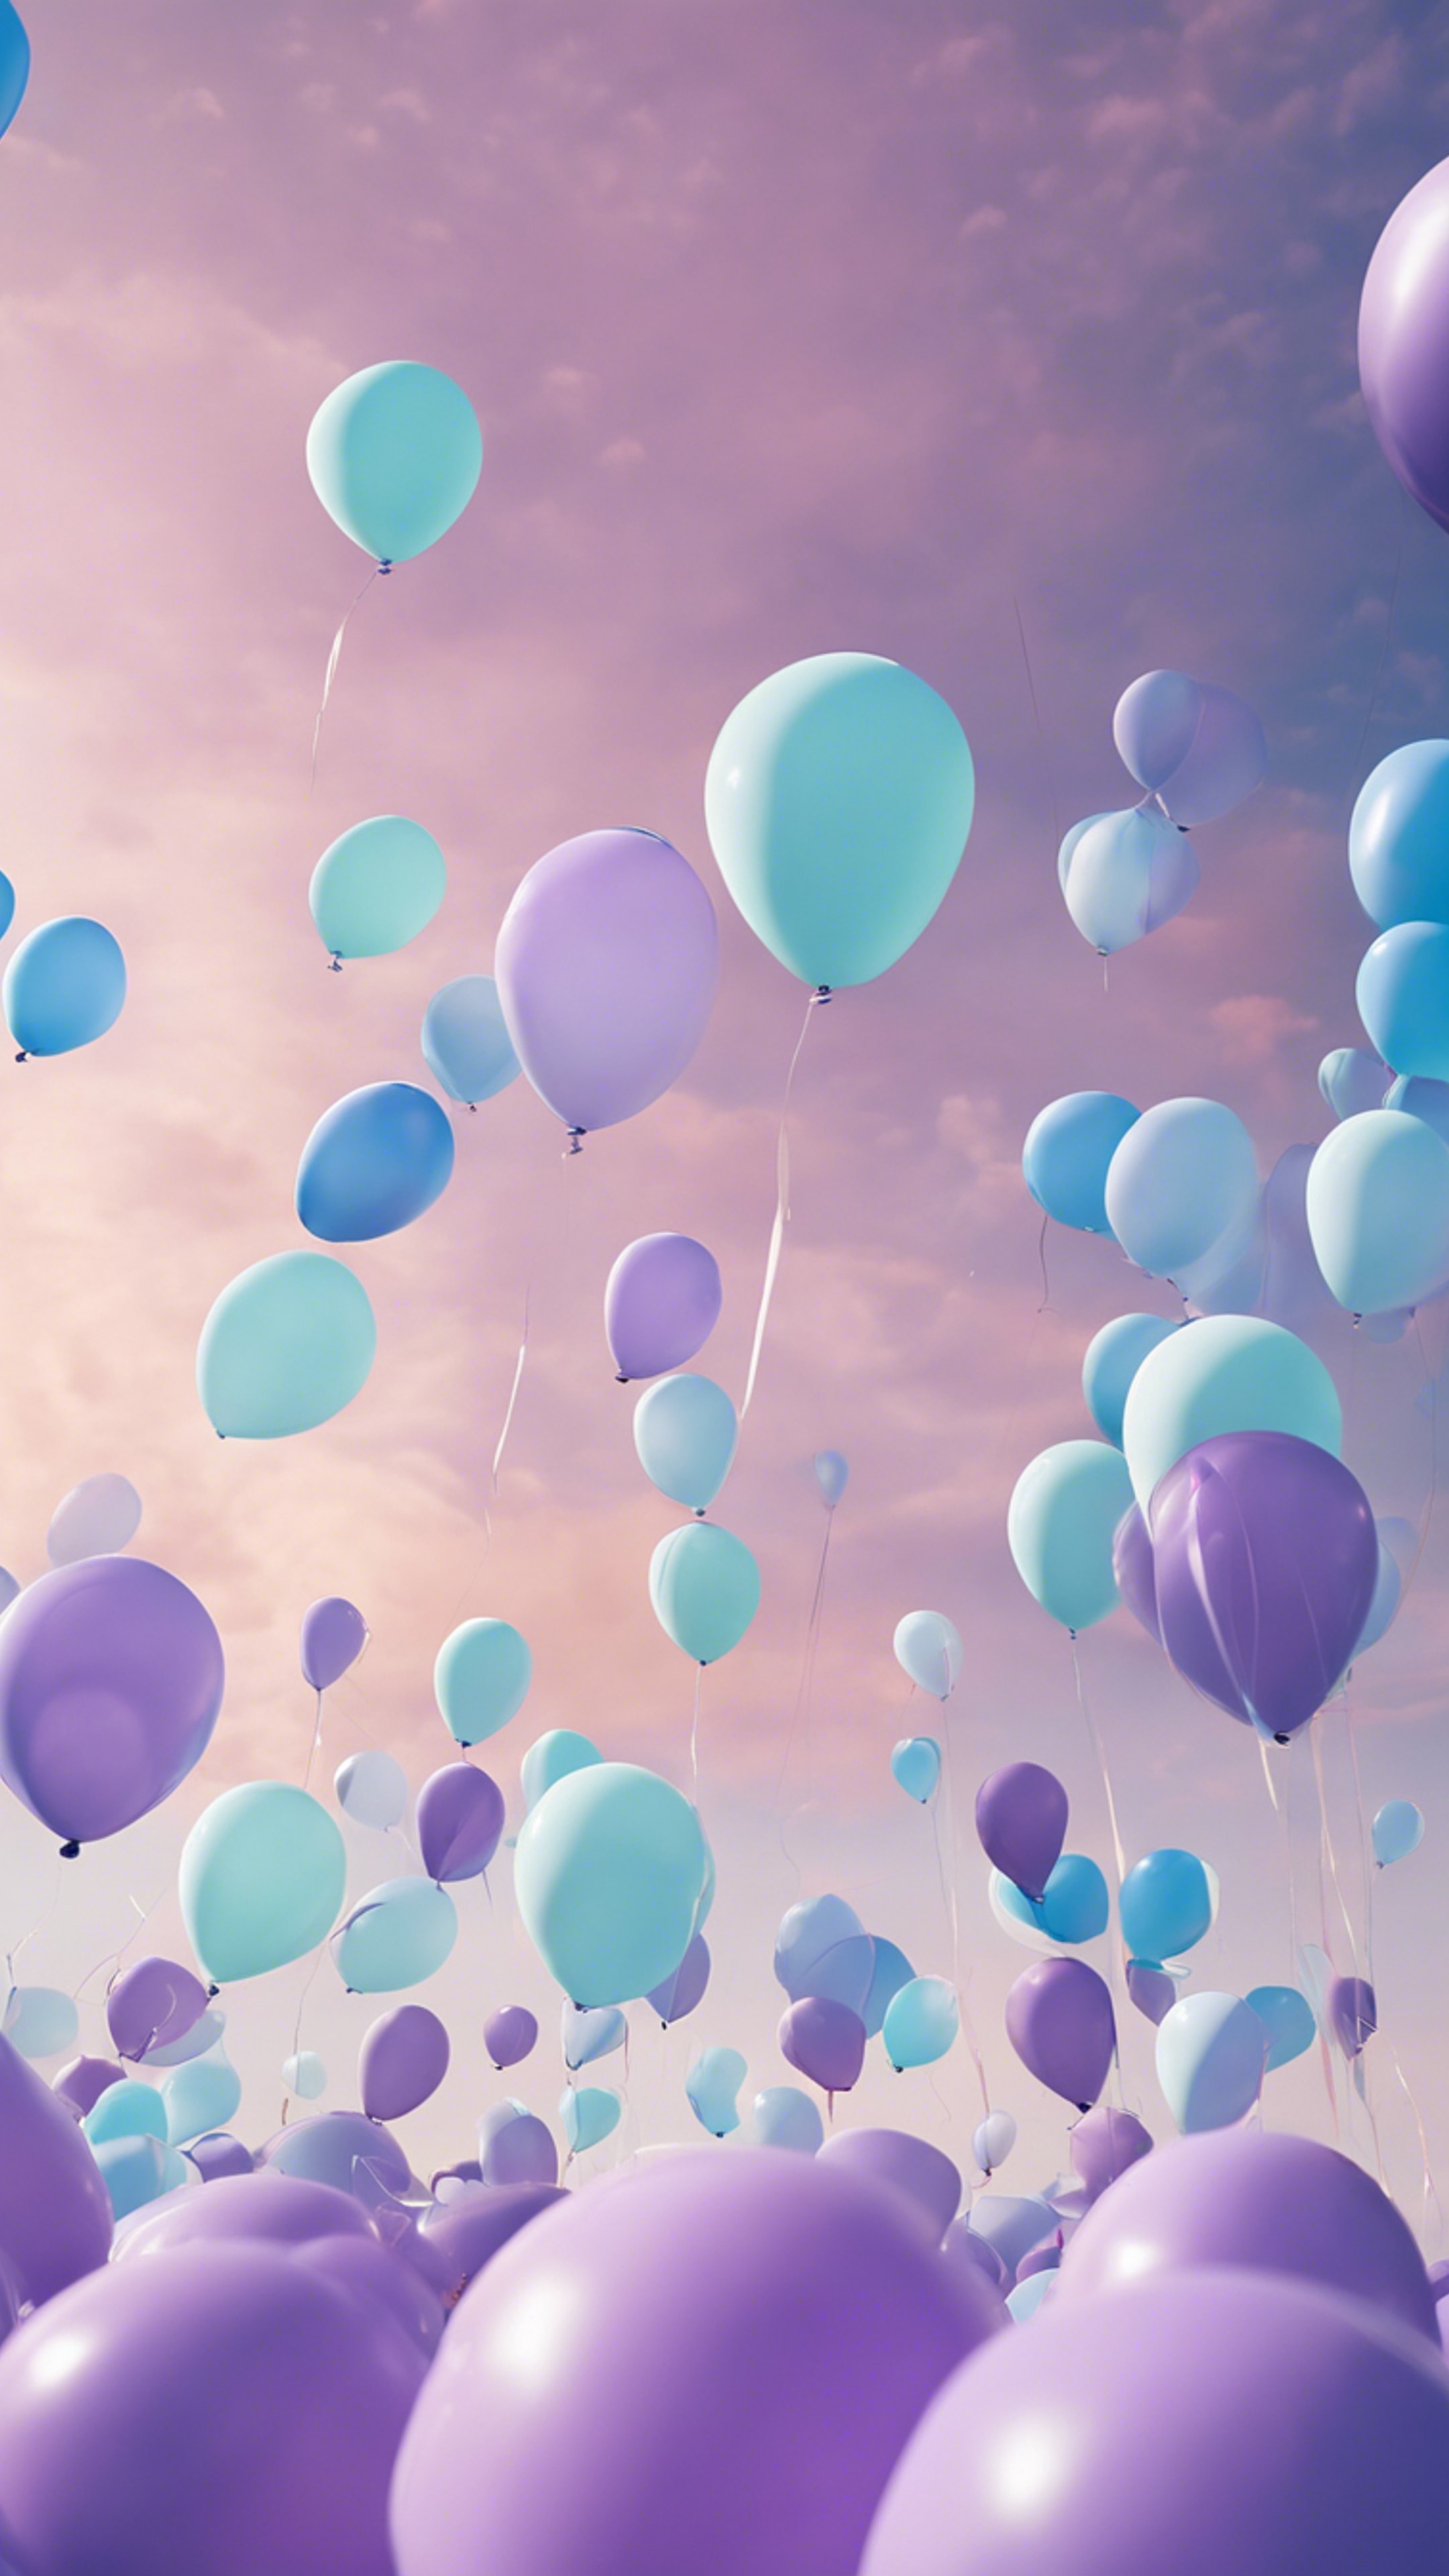 A whimsical scene of pastel purple and blue balloons filling the summer sky. Ταπετσαρία[fd1f8f768f0047c48fb6]